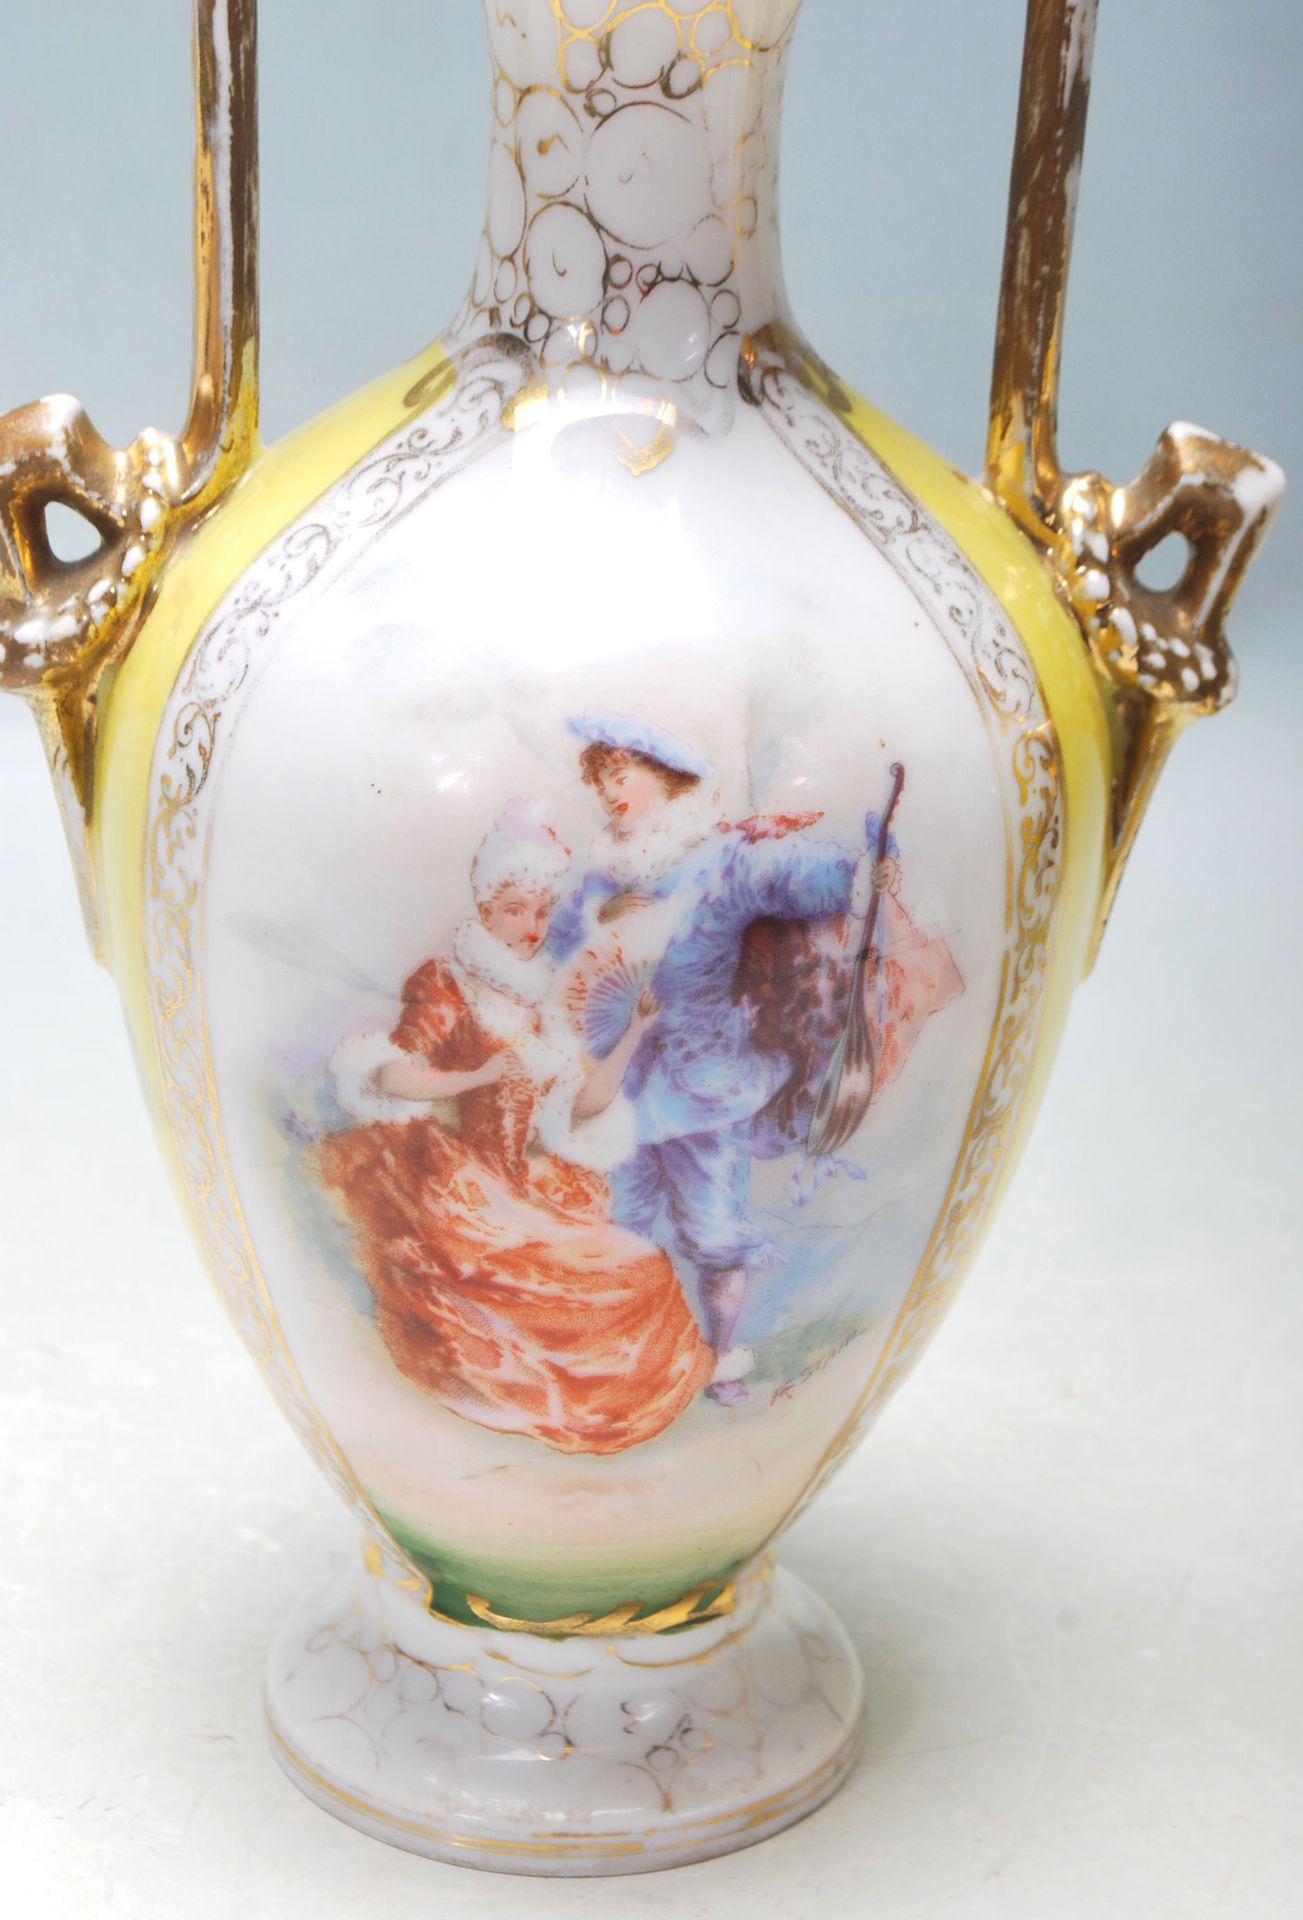 A PAIR OF GERMAN VASES BY VON SCHIERHOLZ 1900C - C.G. SCHIERHOLZ & SON - PAITED BY FR STAHL - Image 2 of 11